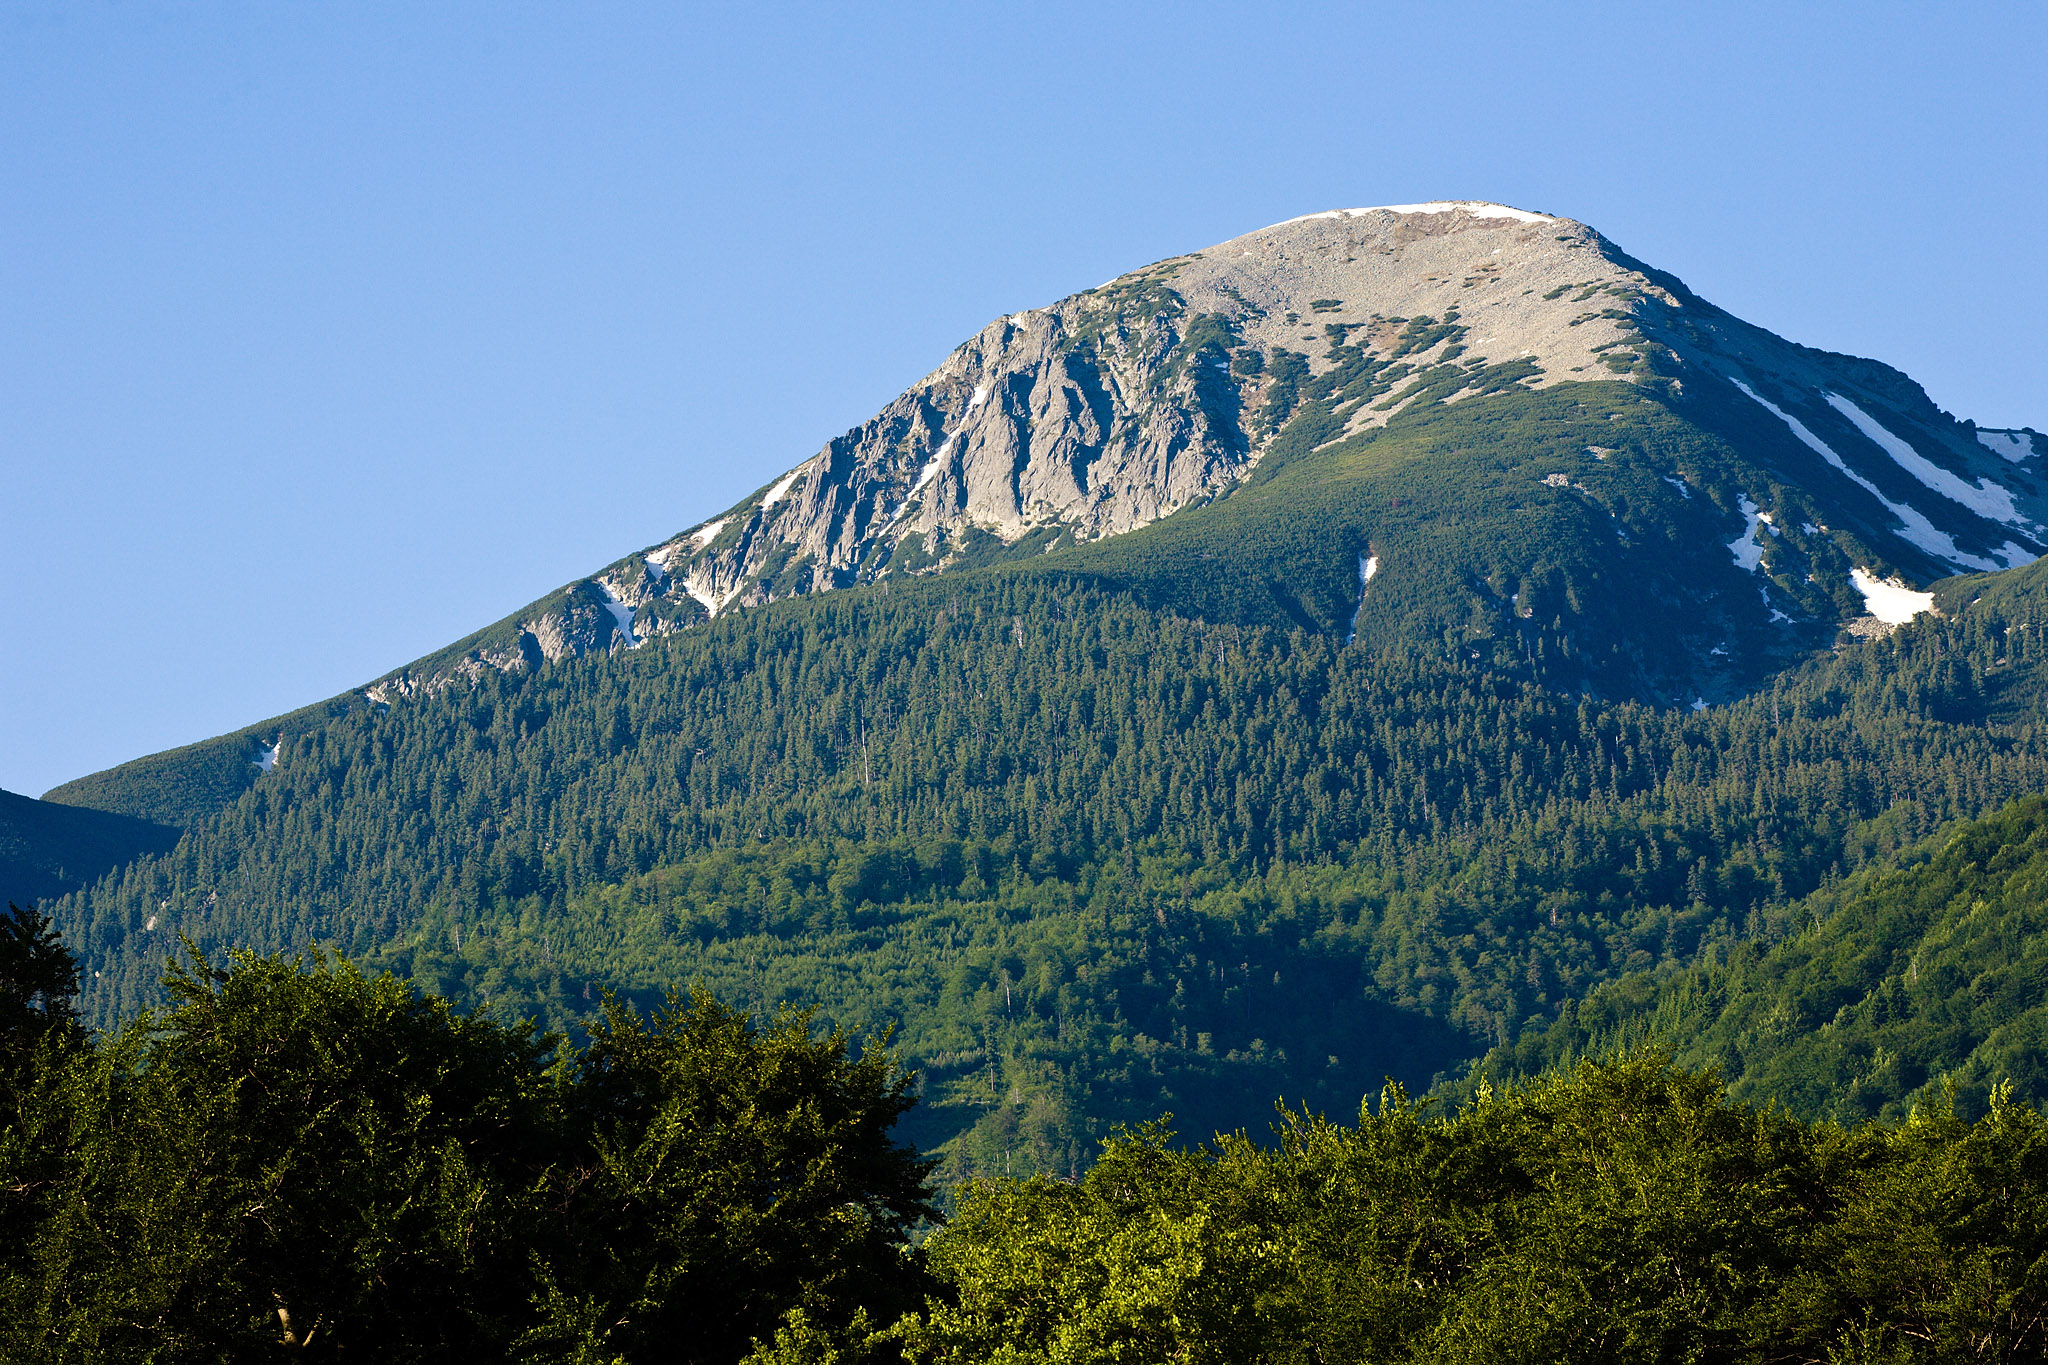 Pirin is one of three national parks in Bulgaria that together cover 1.5% of the country’s territory. It also overlaps with two EU Natura 2000 sites, and is one of two Bulgarian natural heritage sites on UNESCO’s World Heritage list.